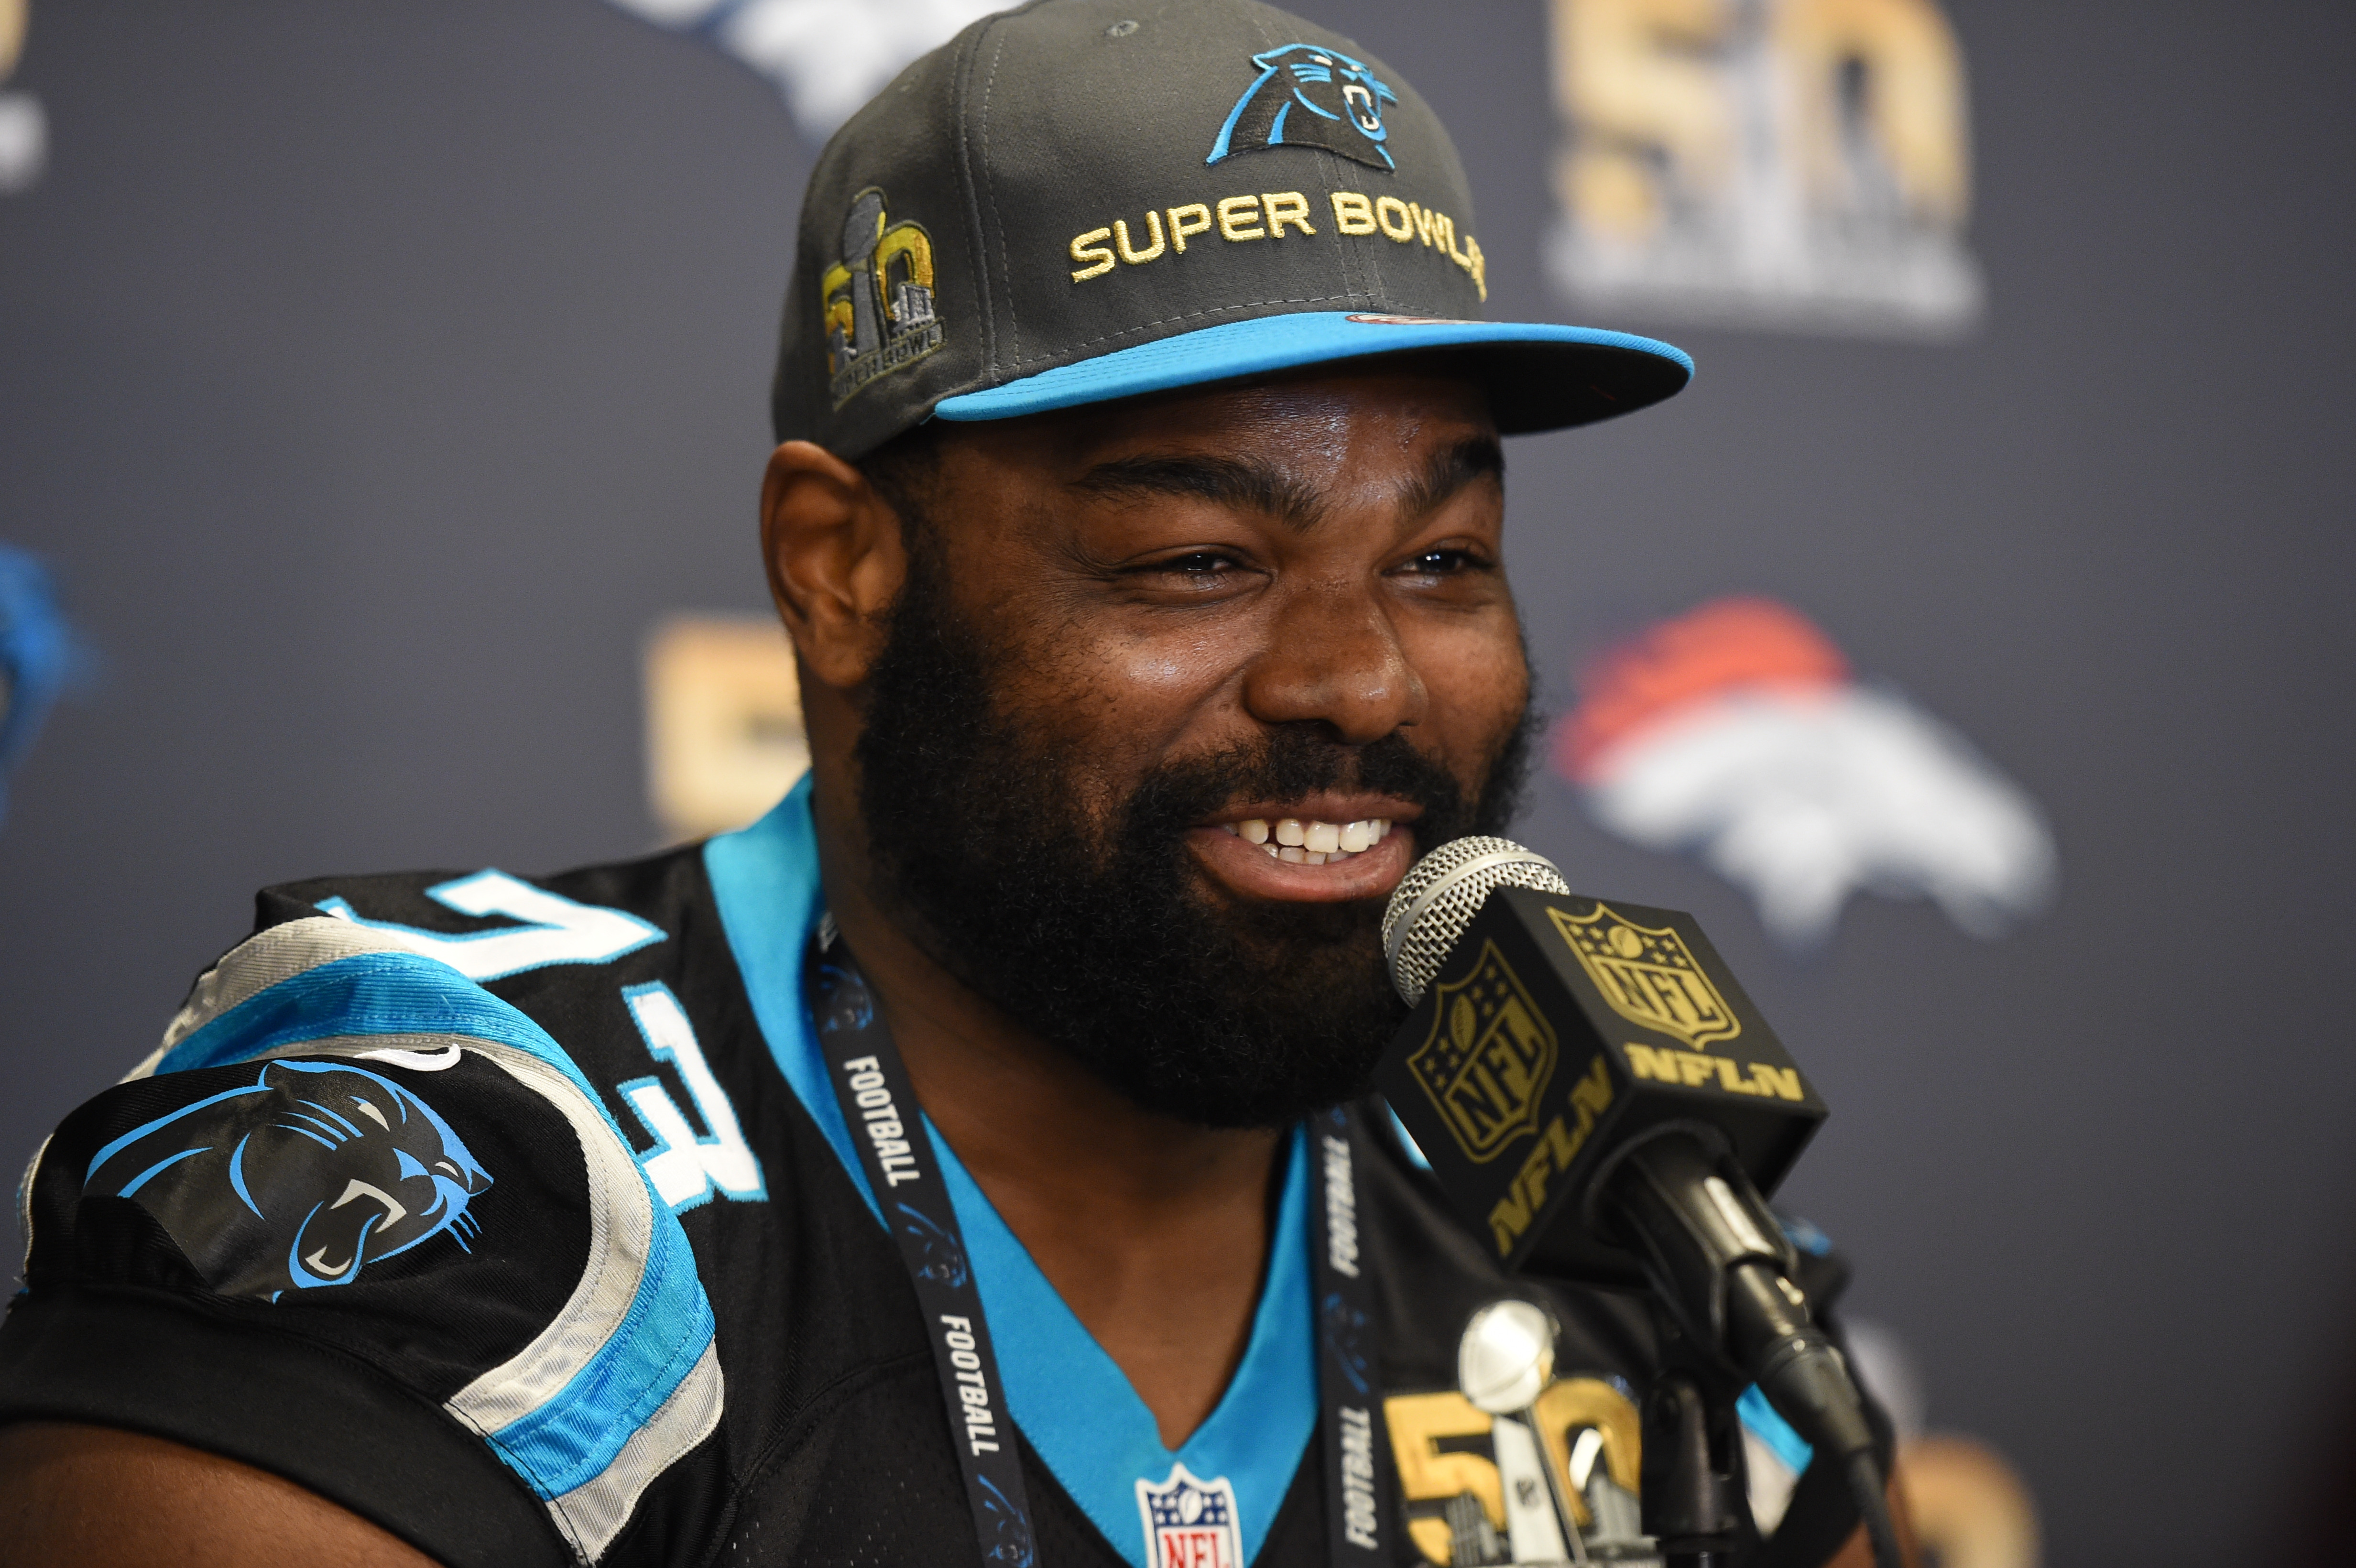 Michael Oher during the Carolina Panthers press conference for Super Bowl 50 in 2016 in San Jose, California. | Source: Getty Images